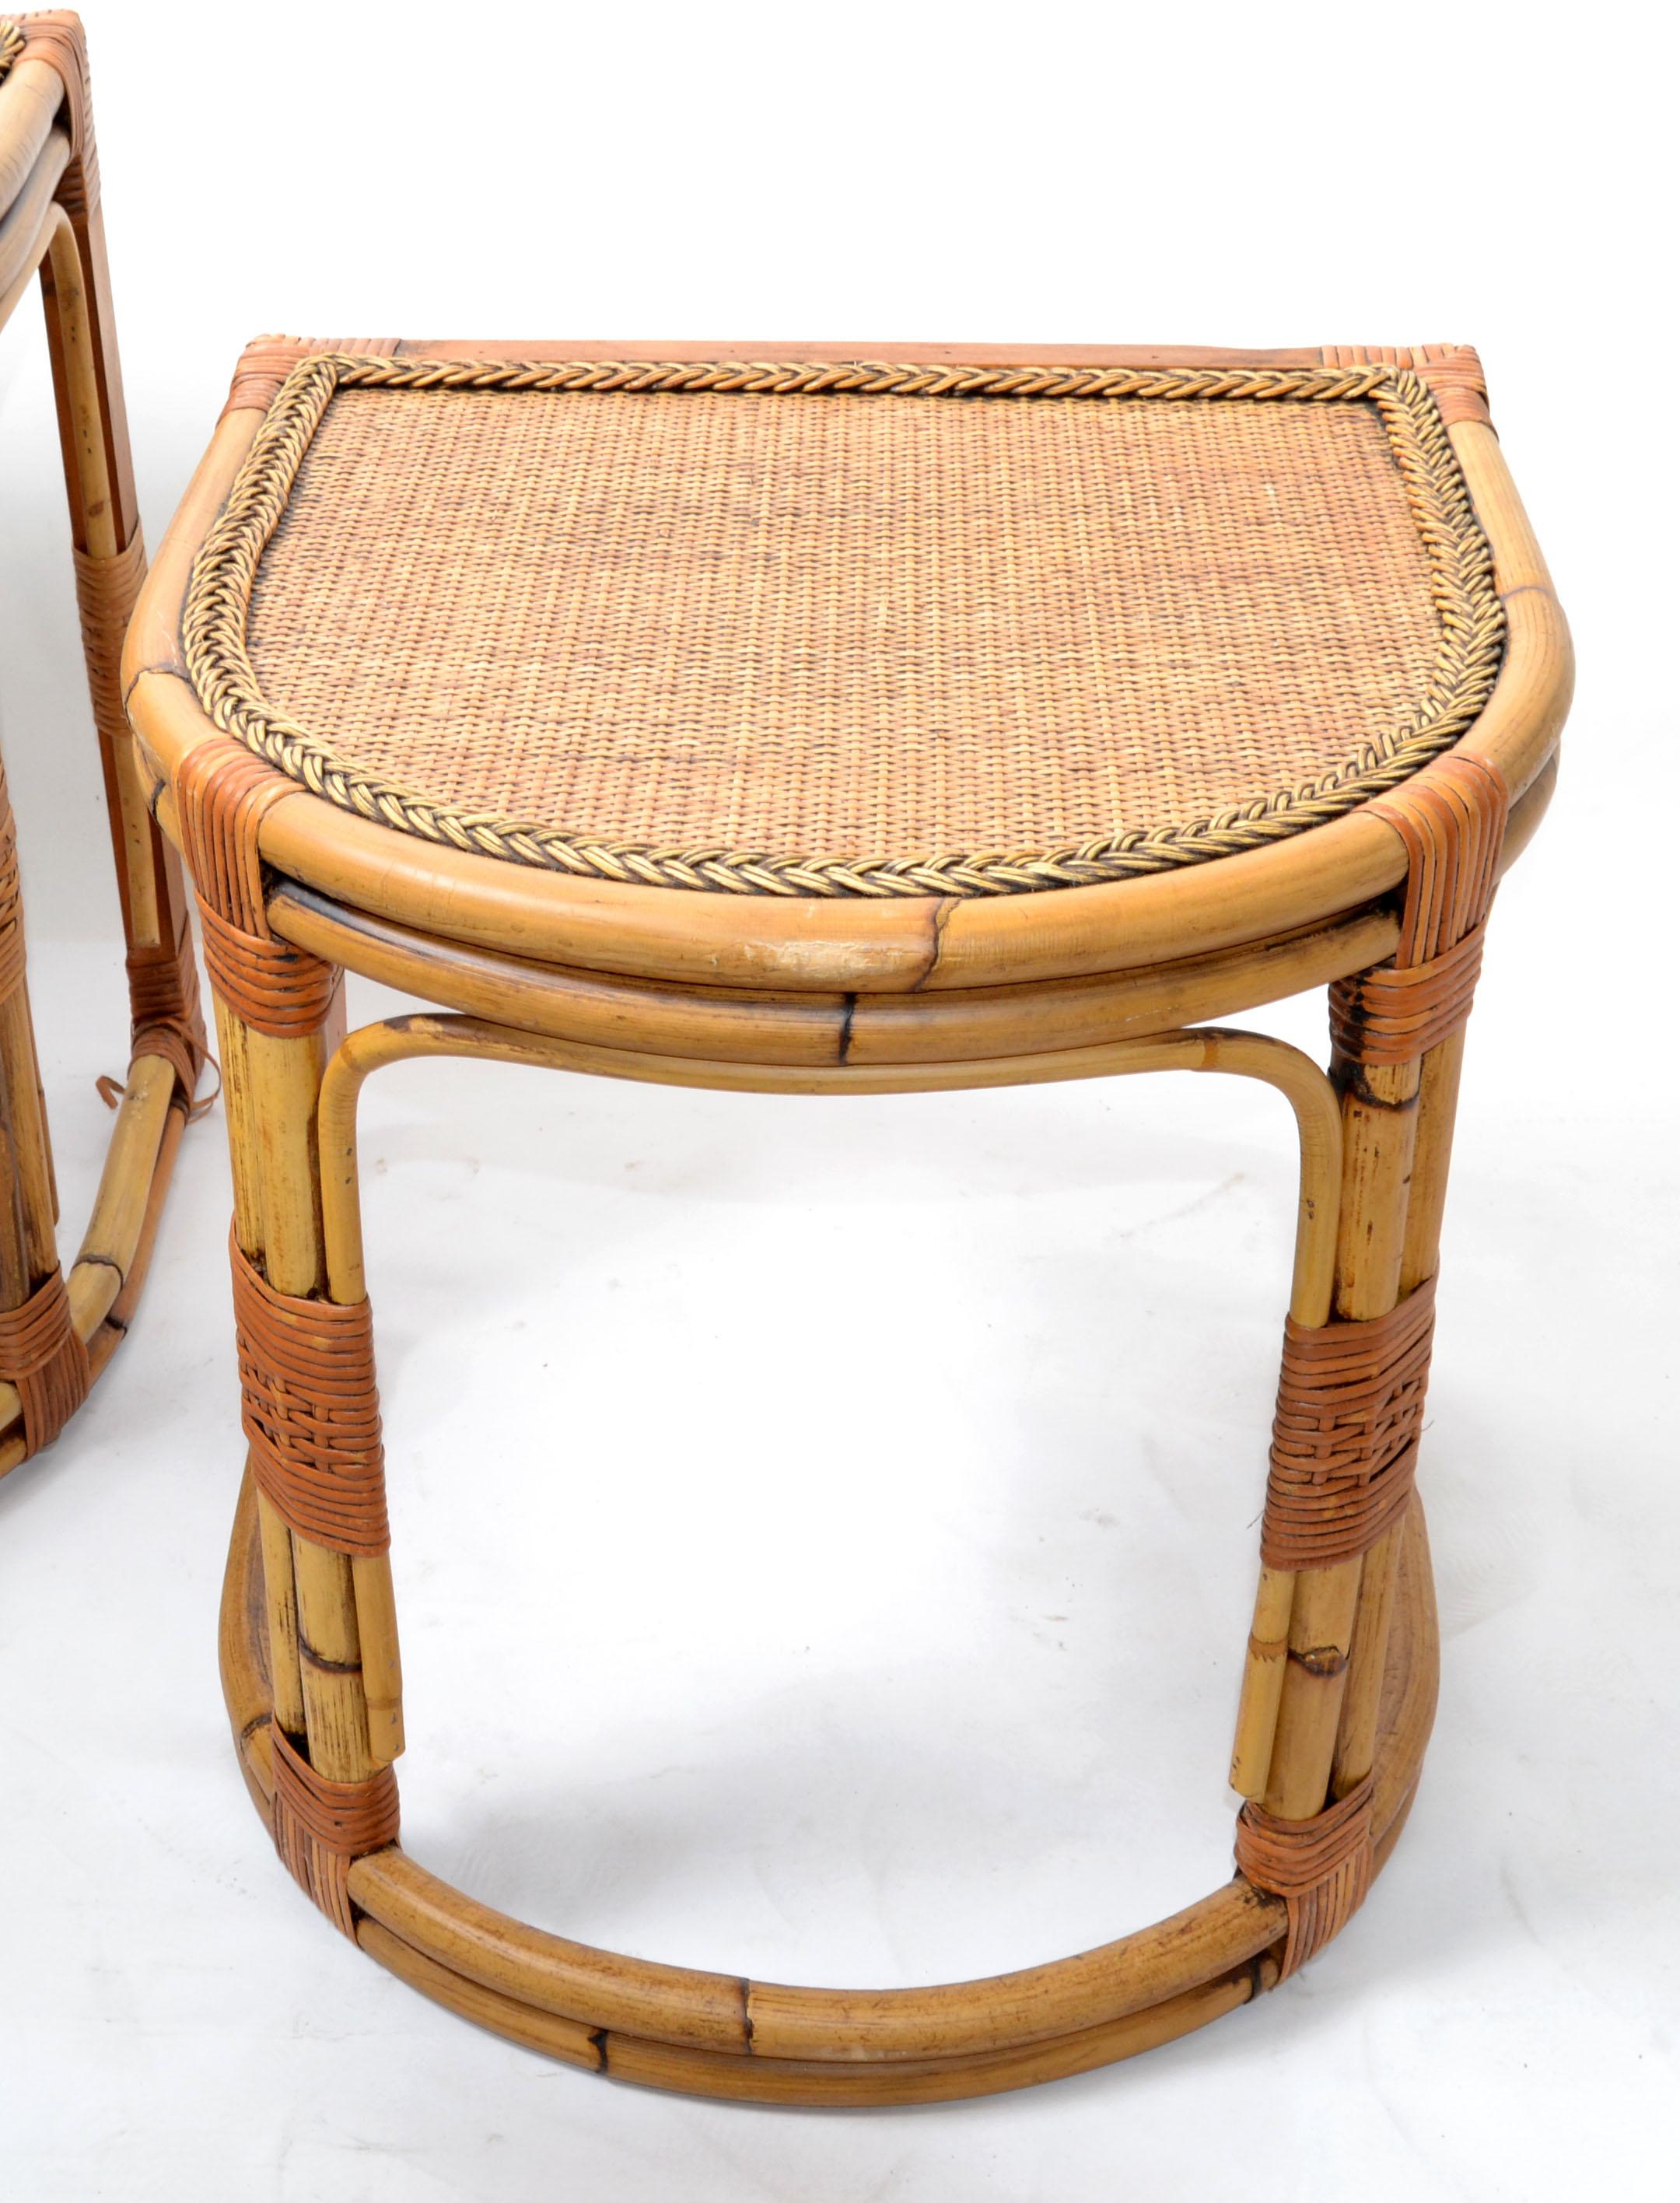 Semi-Circle Bamboo & Cane Nesting Tables / Stacking Tables Handcrafted, Set of 3 For Sale 4